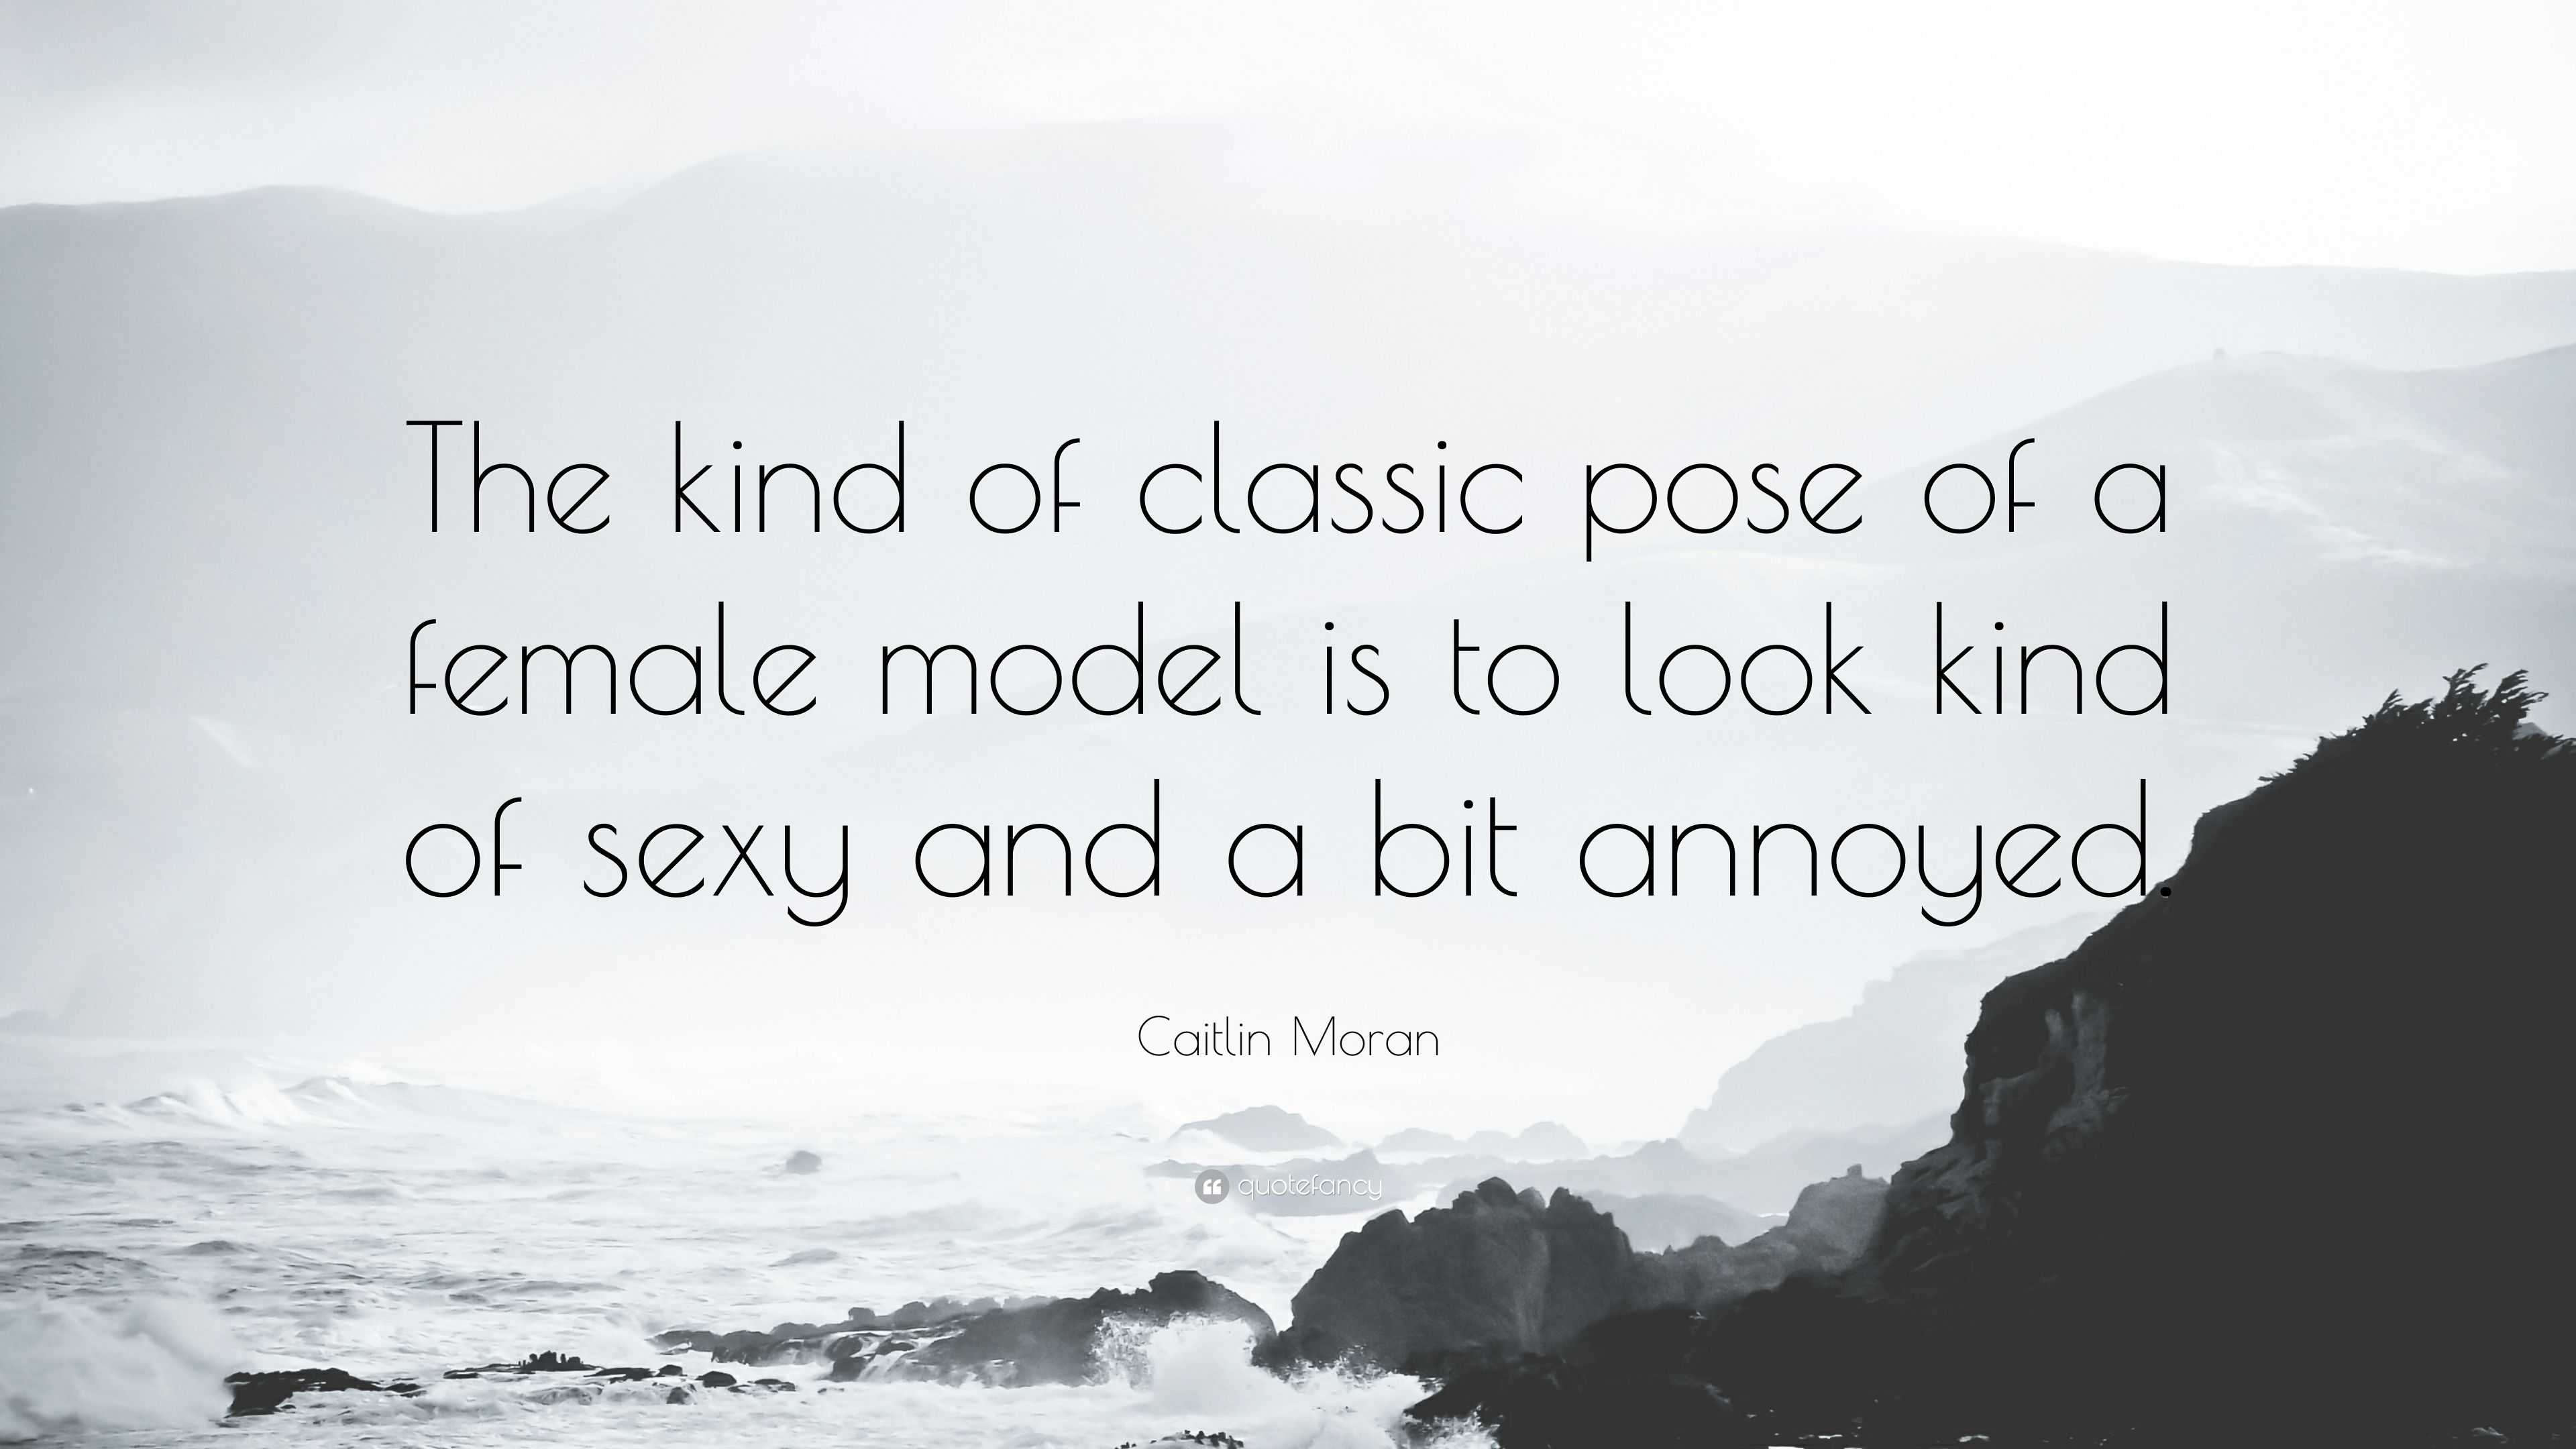 3858466 Caitlin Moran Quote The kind of classic pose of a female model is